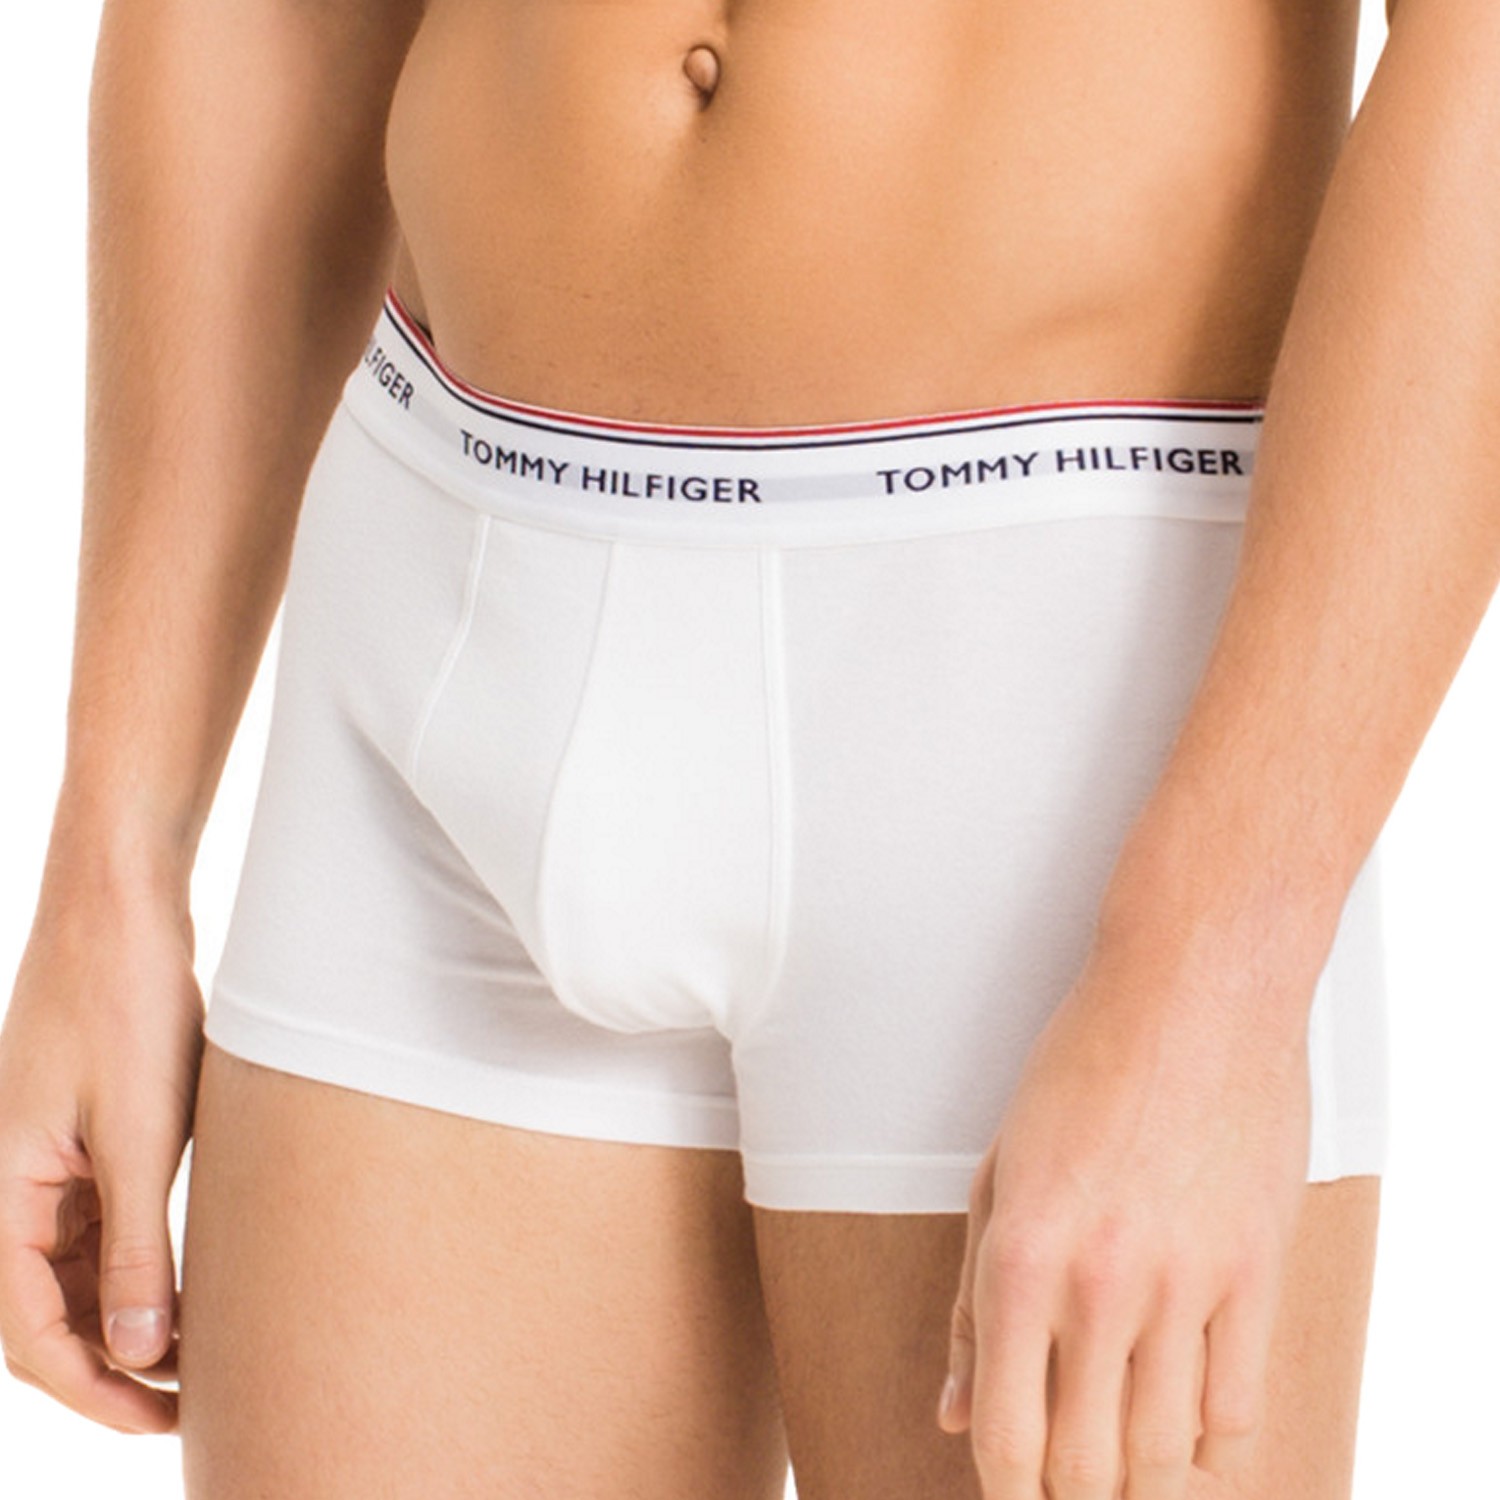 Lot of 3 cotton Stretch boxers Tommy Hilfiger - white: Packs for ma